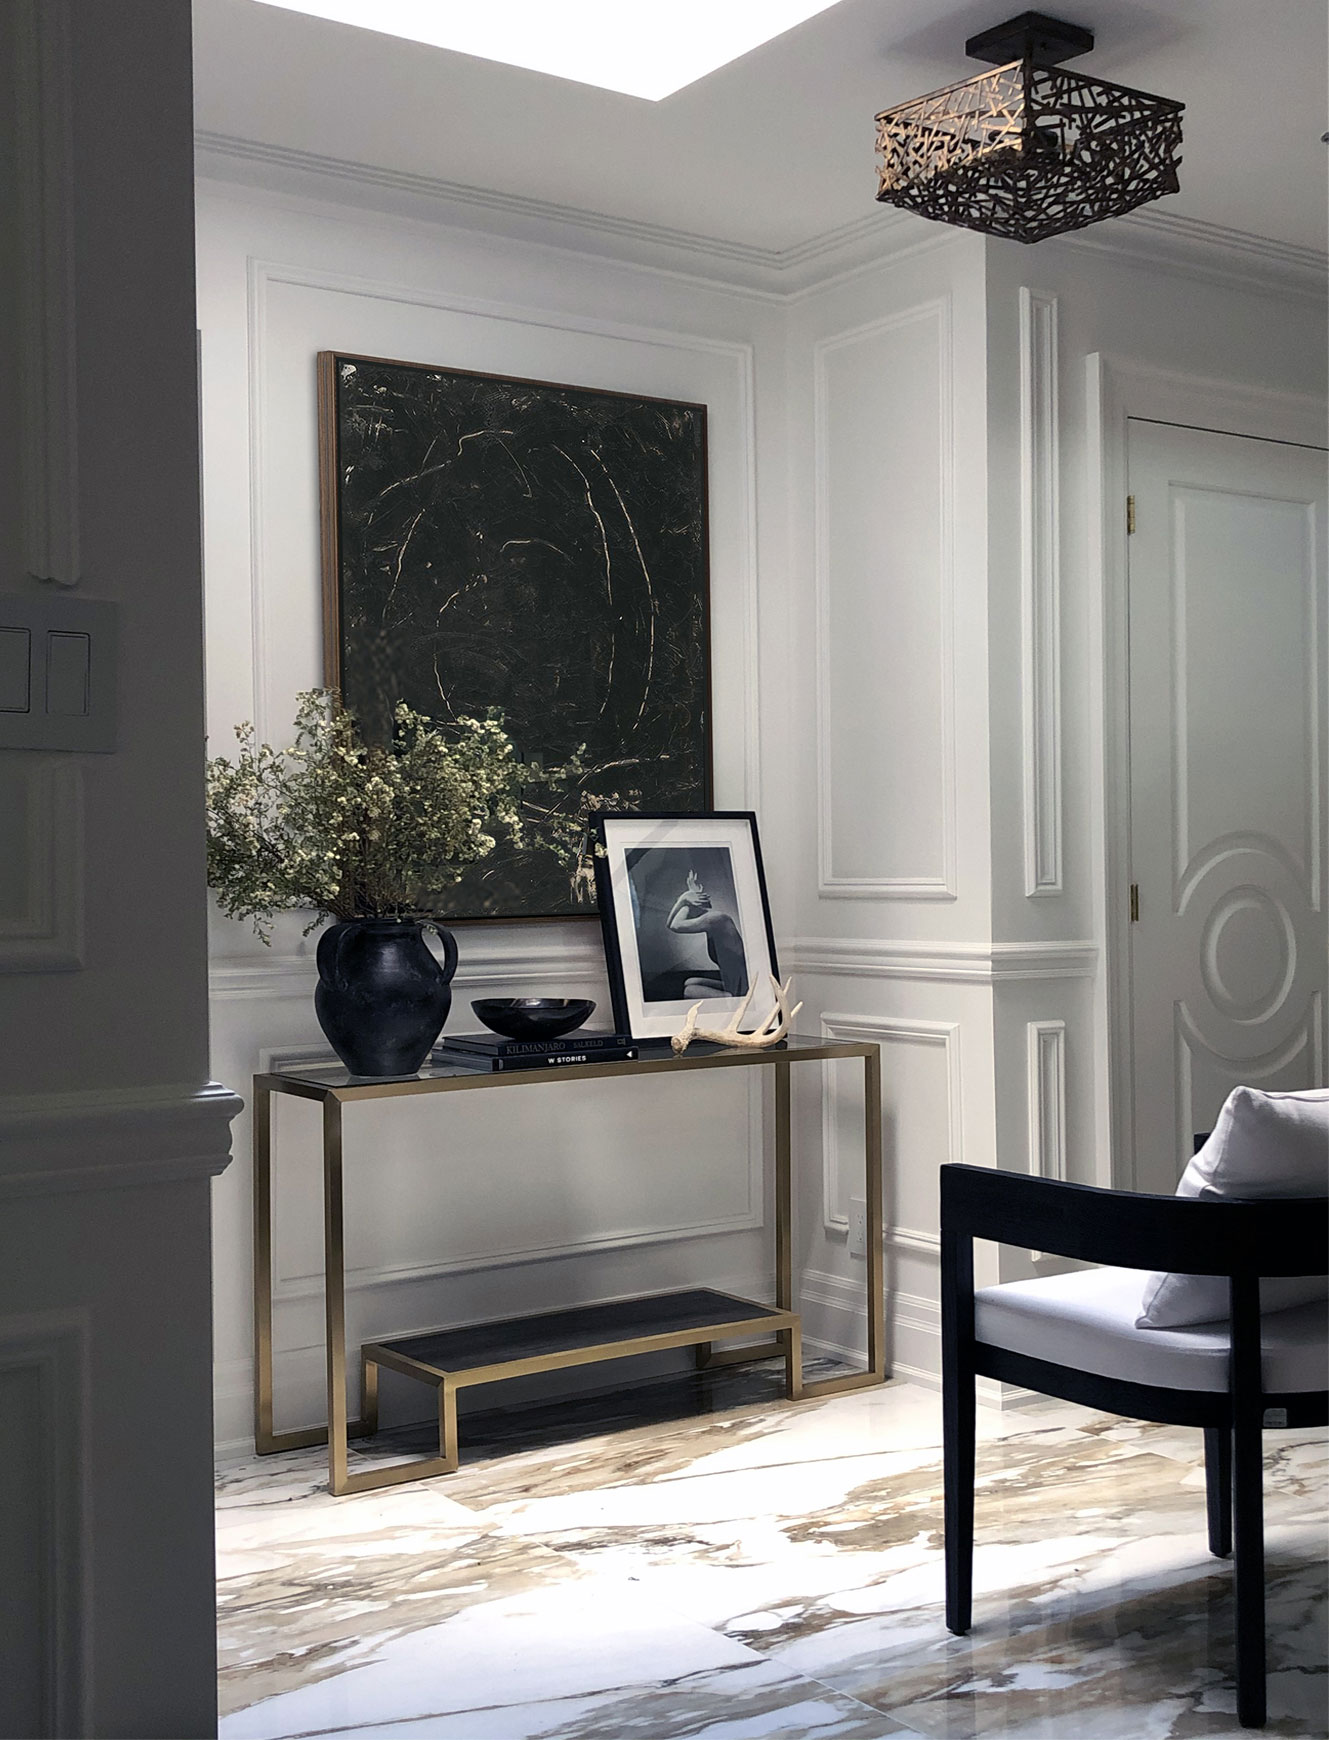 Black statement wall art hanging in a foyer over a console table